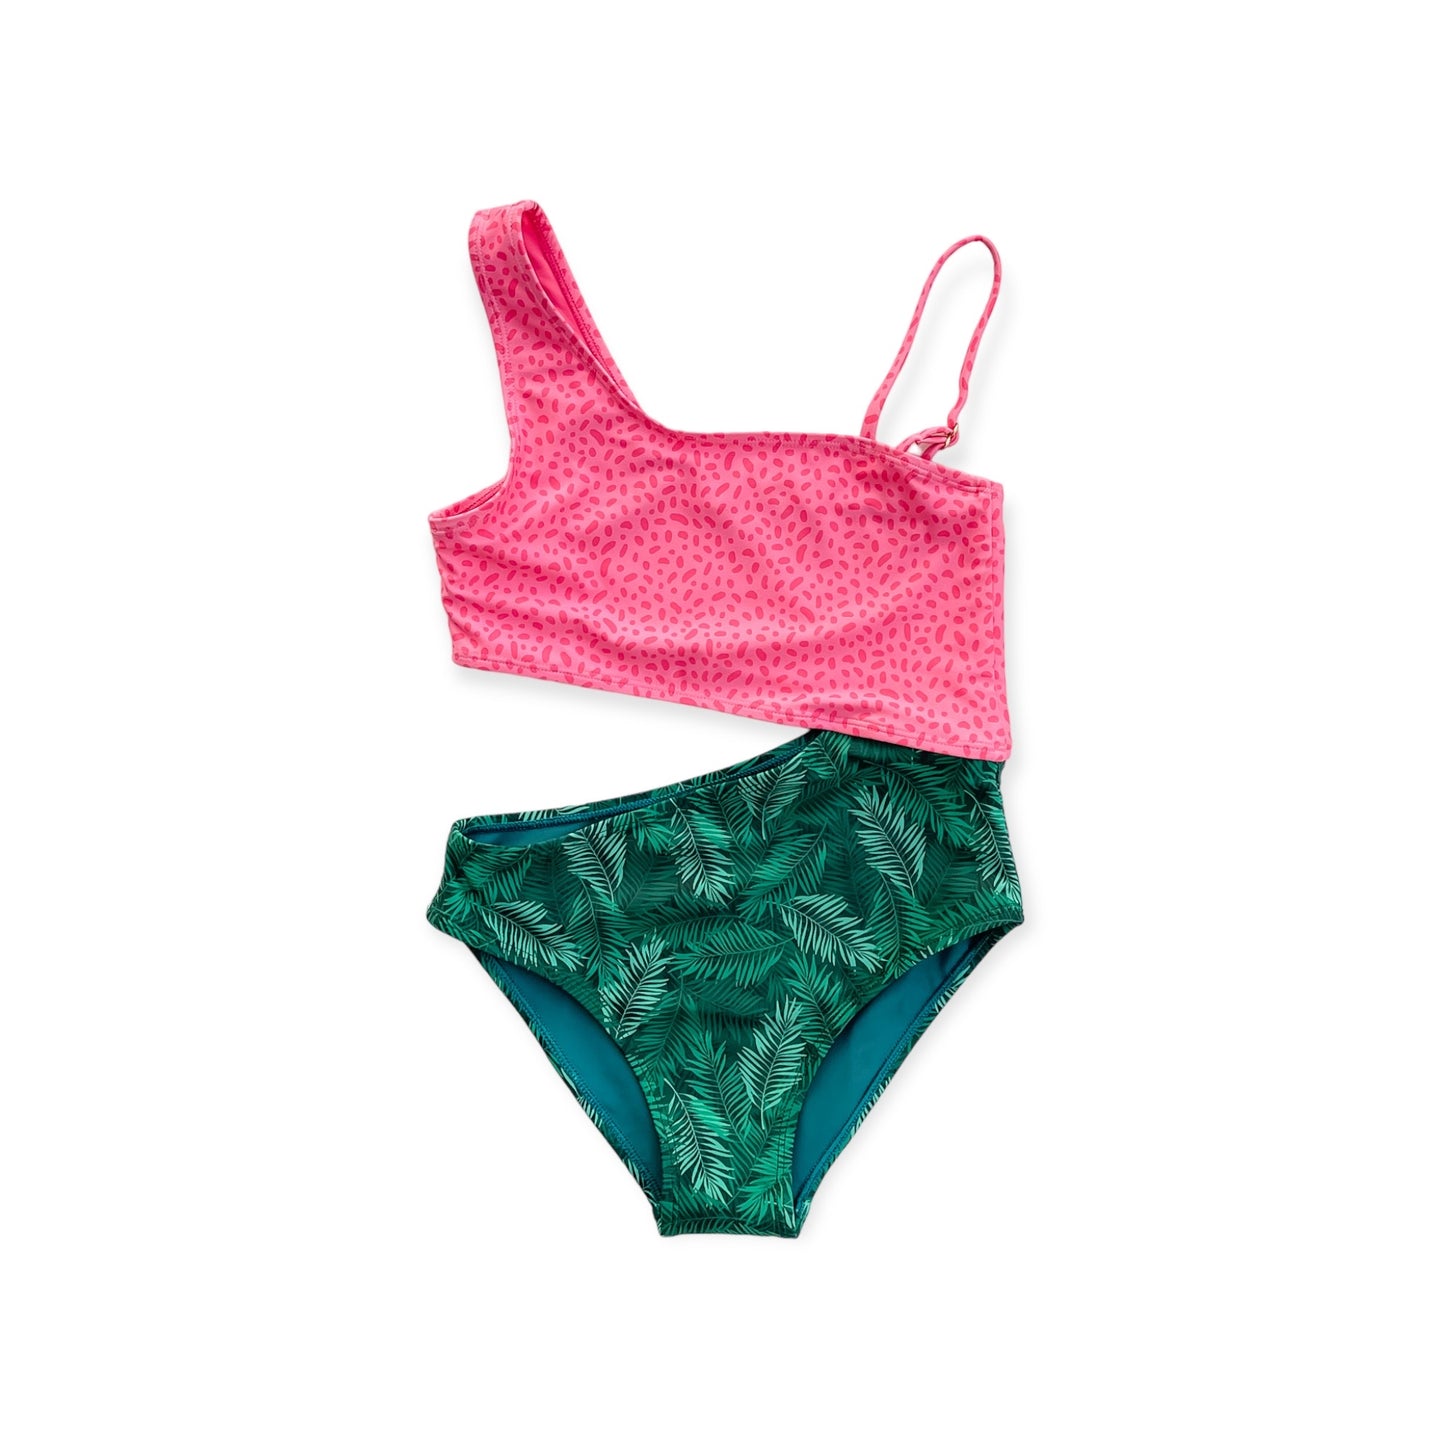 Cutout One Piece - Pink & Palm Leaves